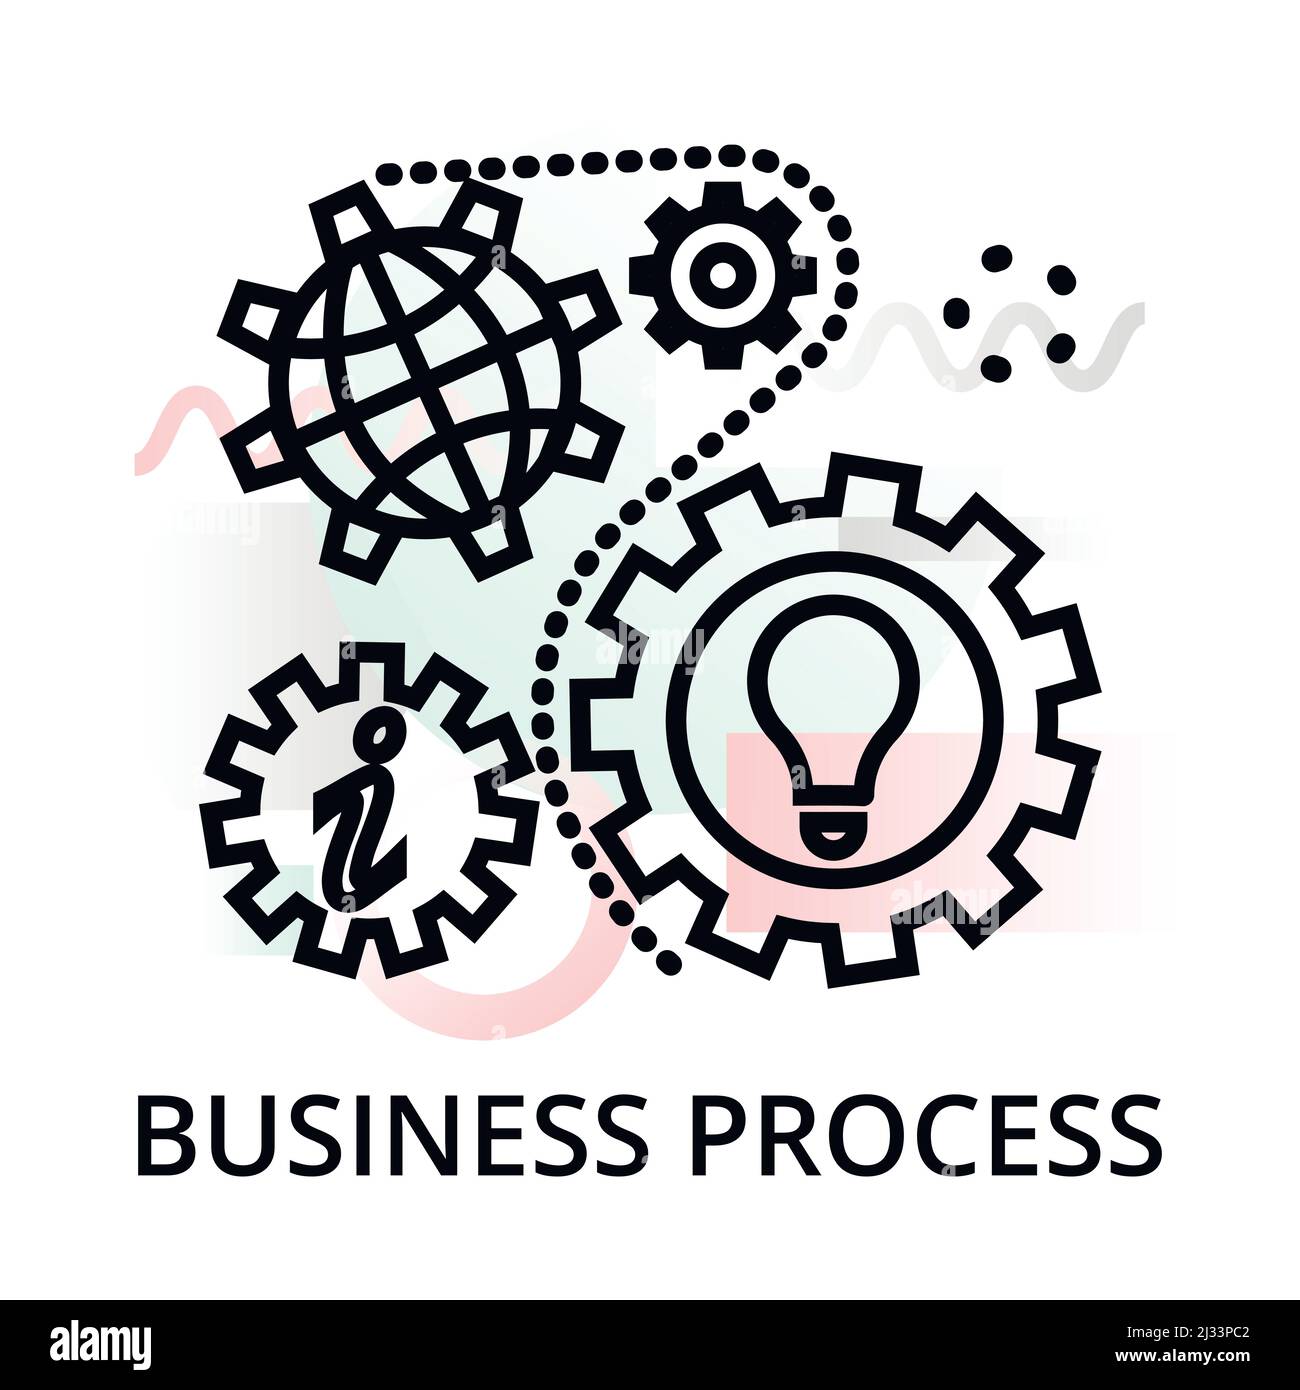 Business process icon on abstract background from startup set, modern editable line vector illustration, for graphic and web design Stock Vector